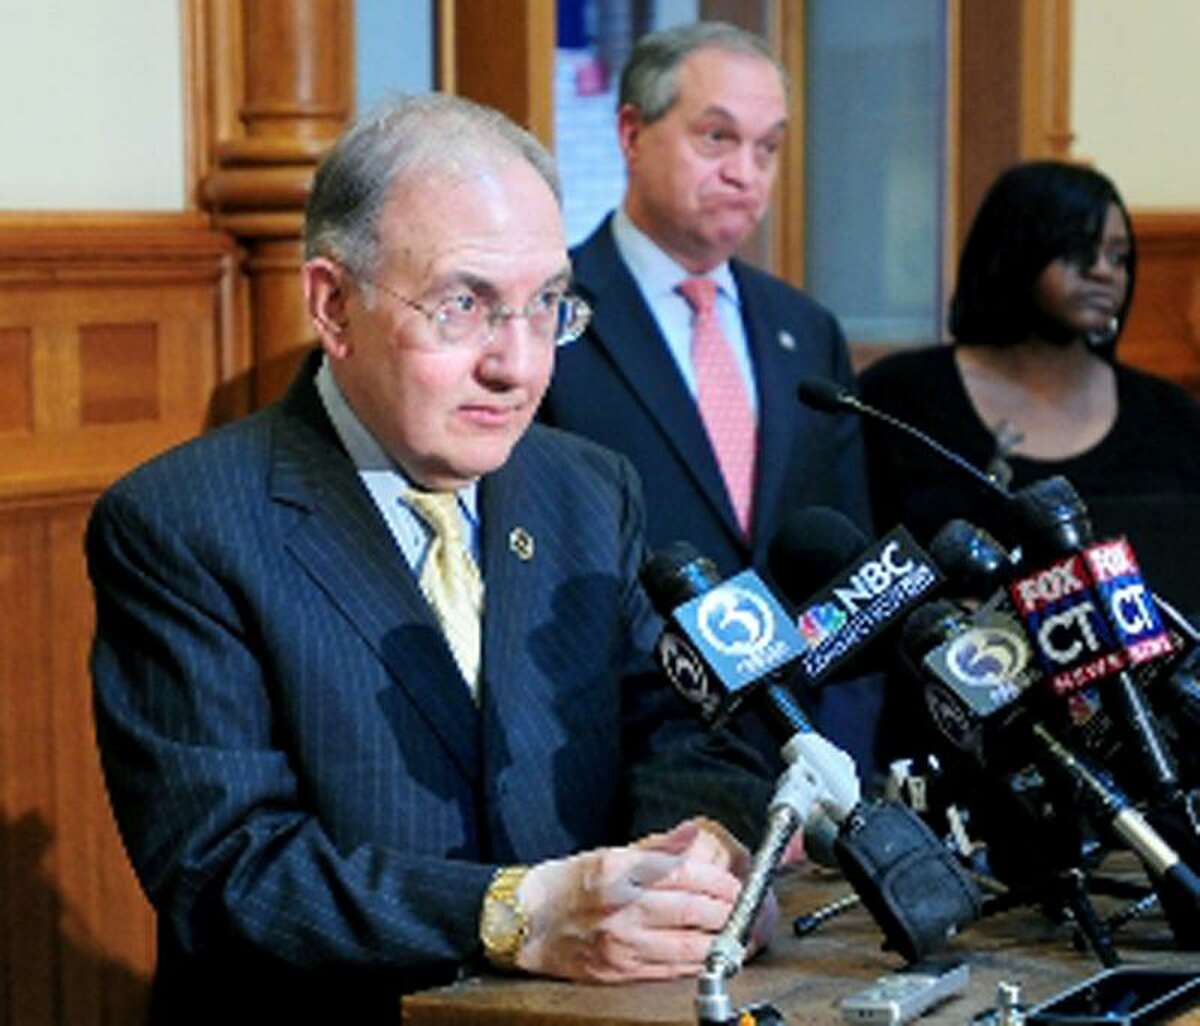 State Senate Majority Leader Martin Looney, left, answers questions concerning the repeal of the death penalty legislation at a press conference at City Hall in New Haven. At center is New Haven Mayor John DeStefano Jr. and at right is Victoria Coward whose son, Tyler, was shot and killed in 2007. Arnold Gold/New Haven Register